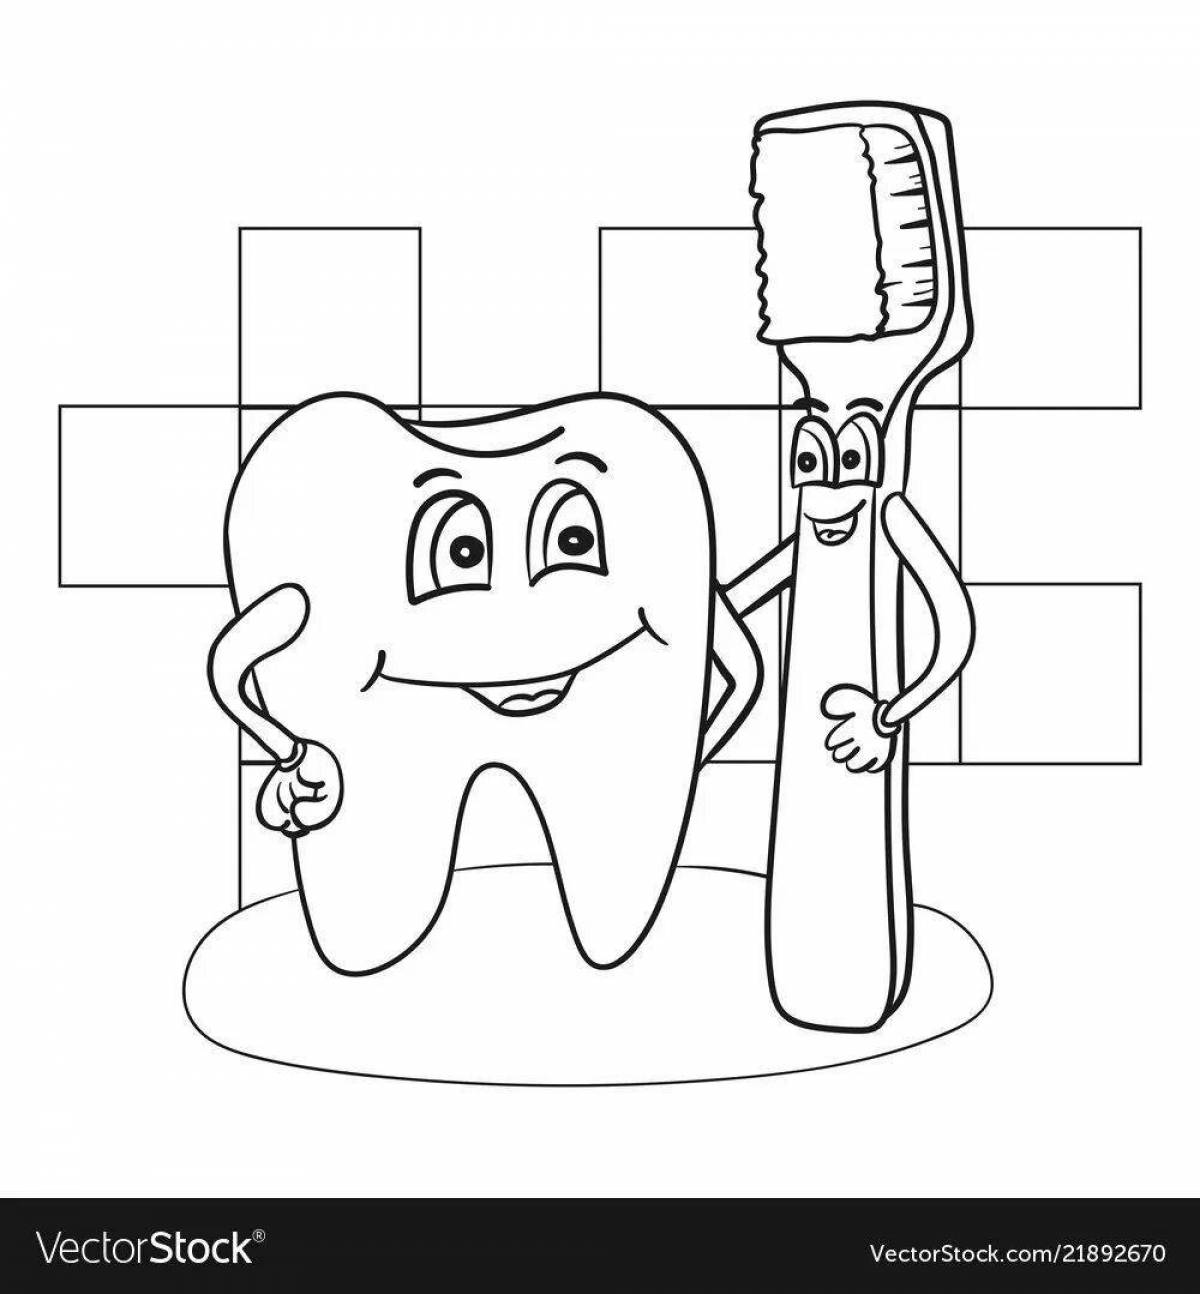 Playful dentist coloring book for kids